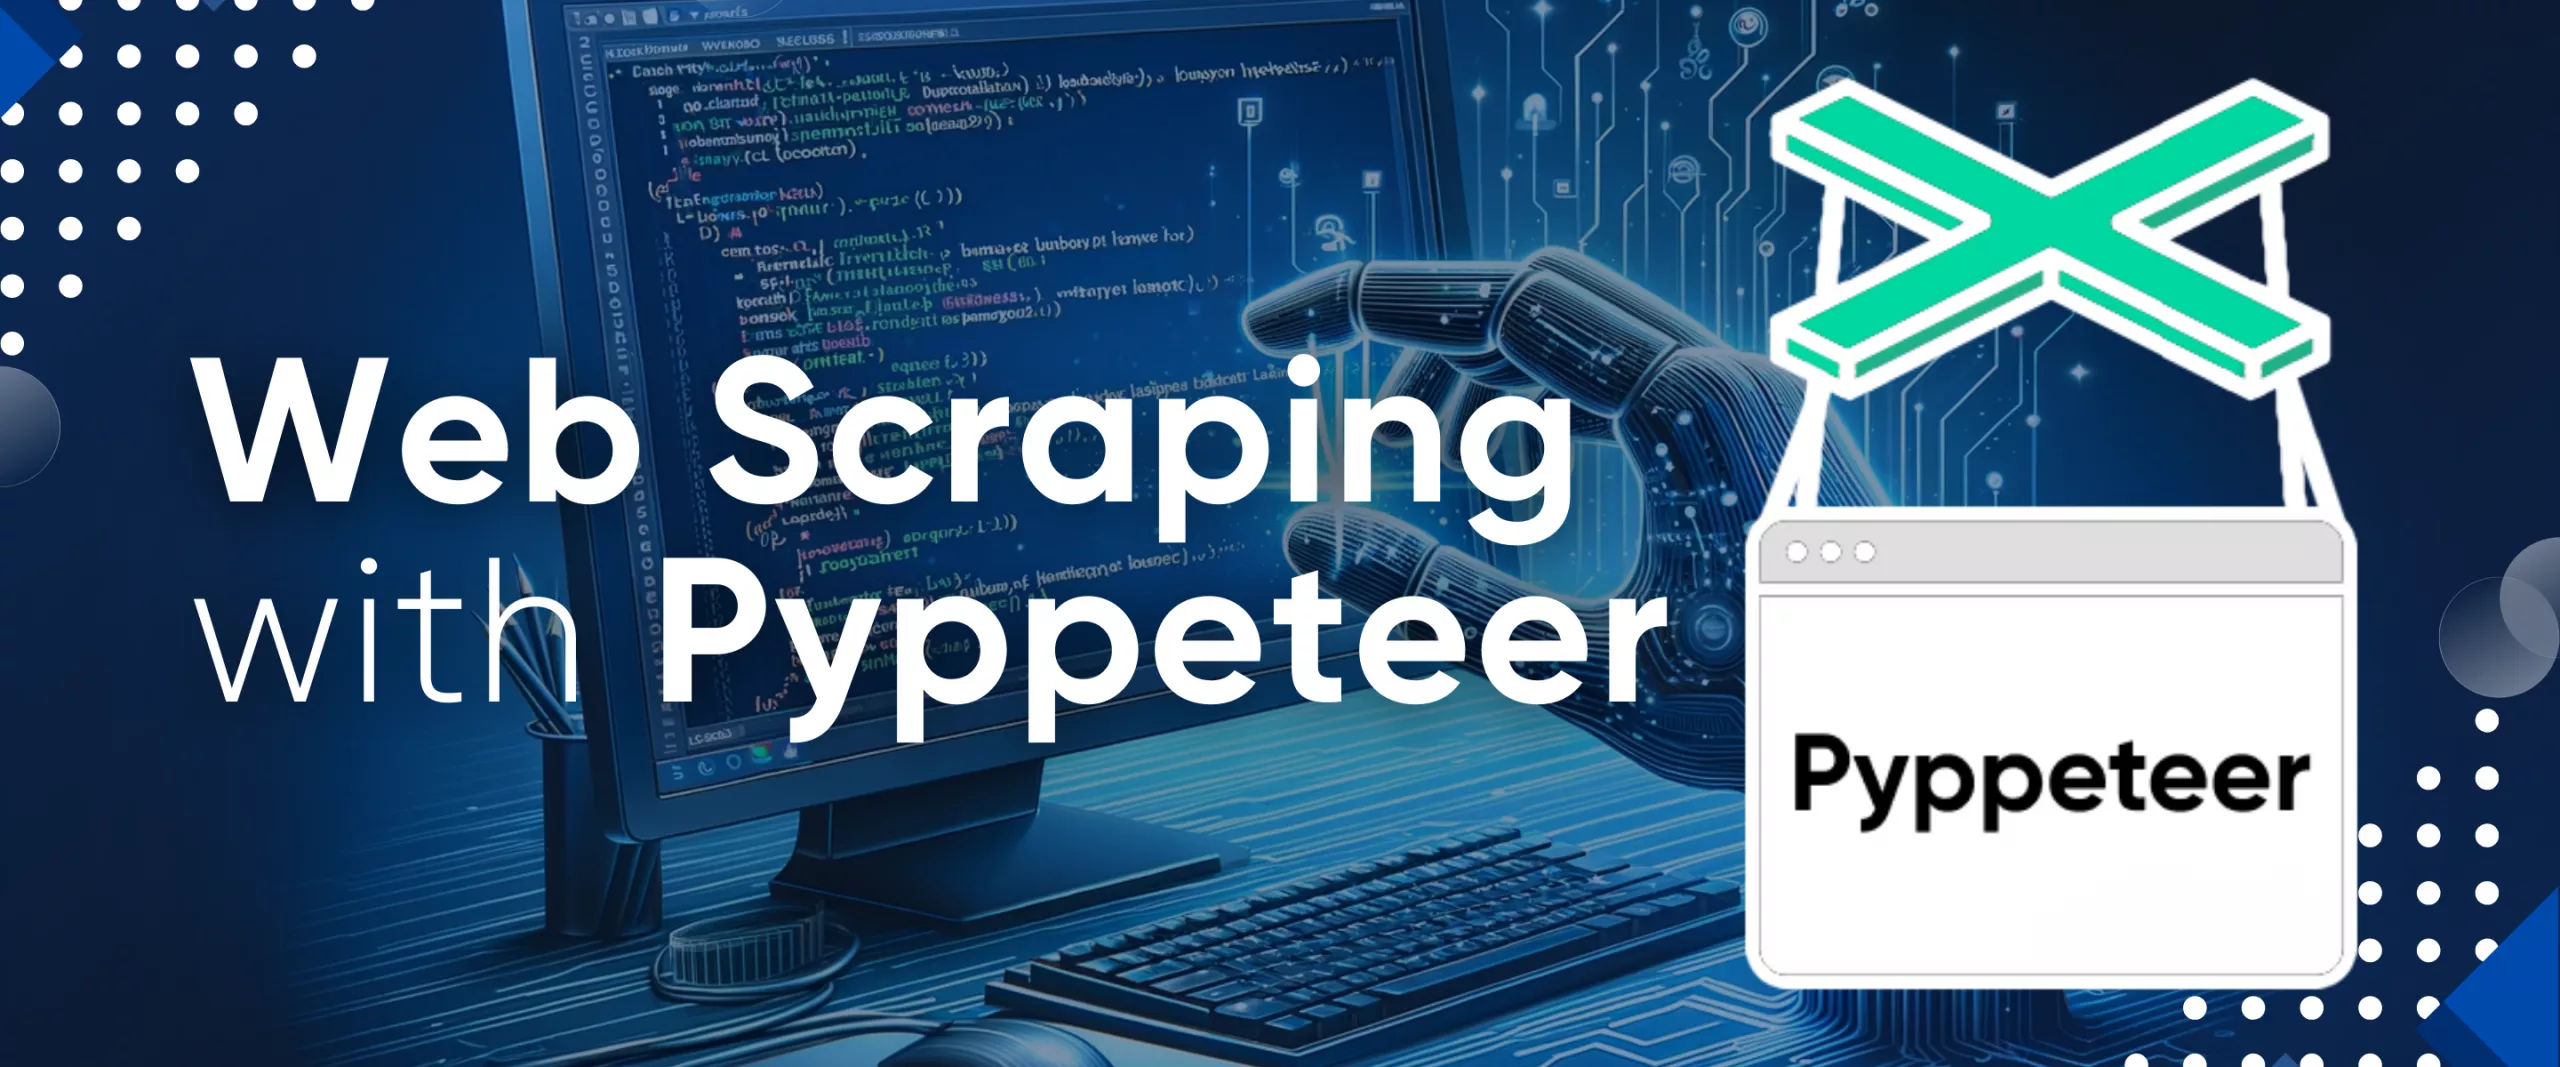 Practical Guide to Web Scraping with Python Pyppeteer